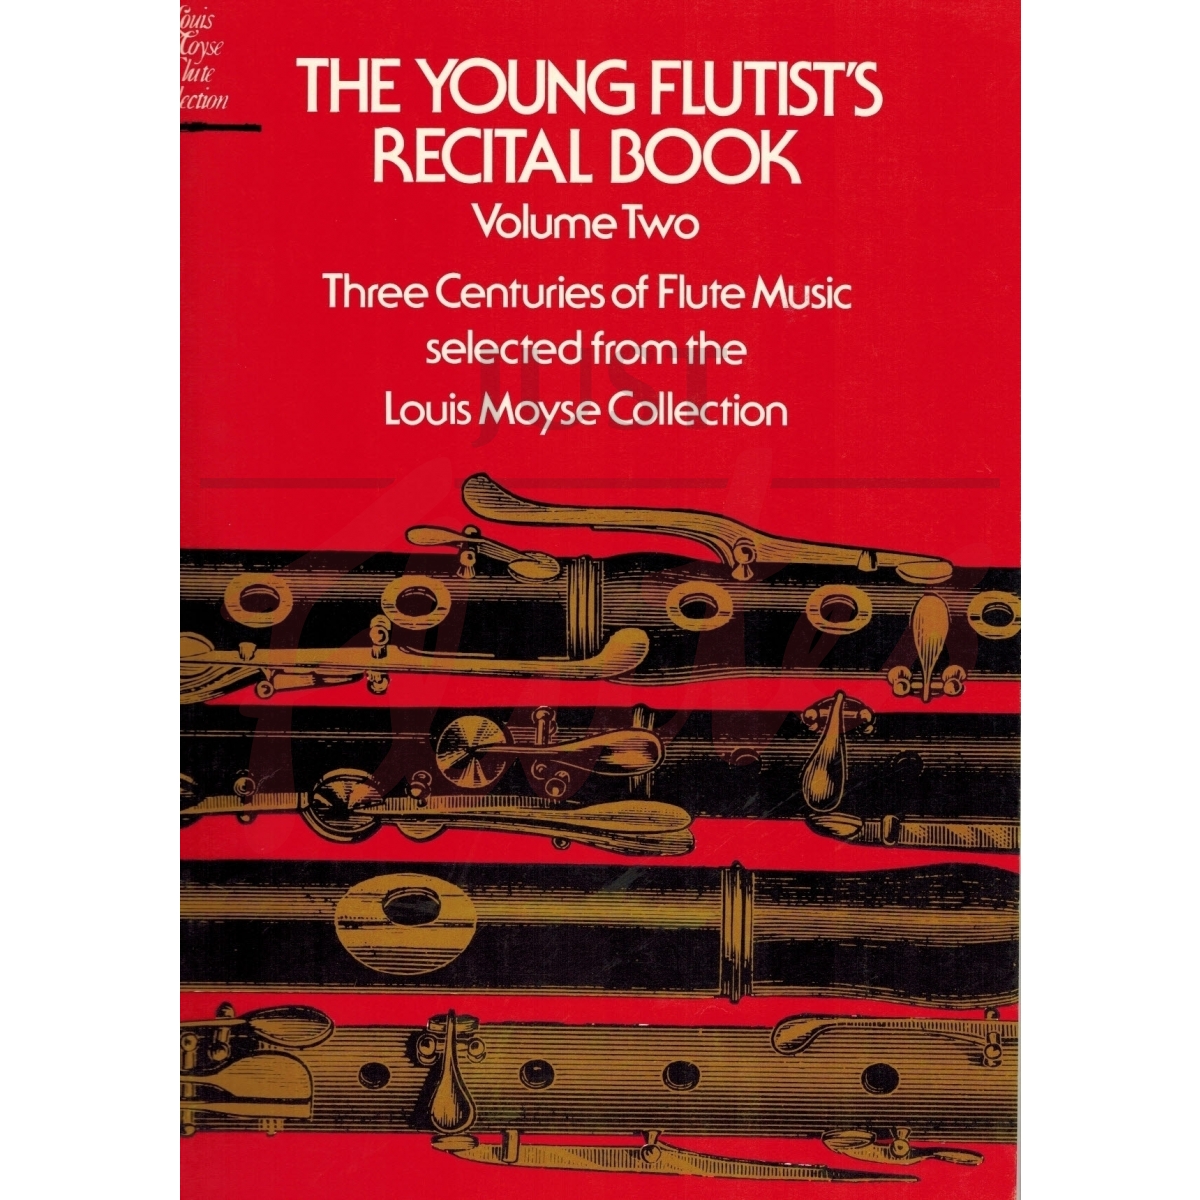 The Young Flutist's Recital Book Volume Two